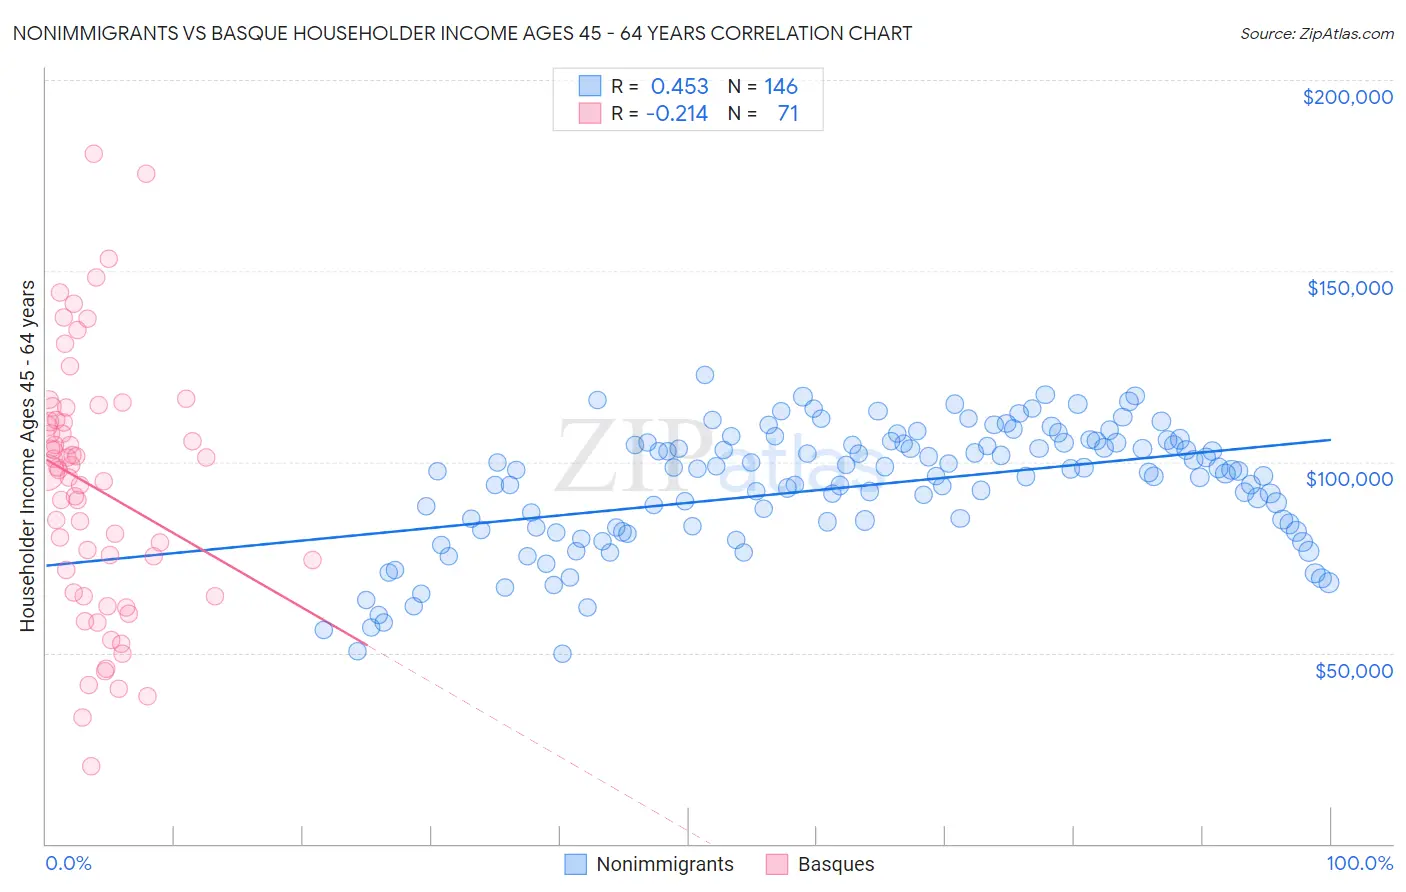 Nonimmigrants vs Basque Householder Income Ages 45 - 64 years